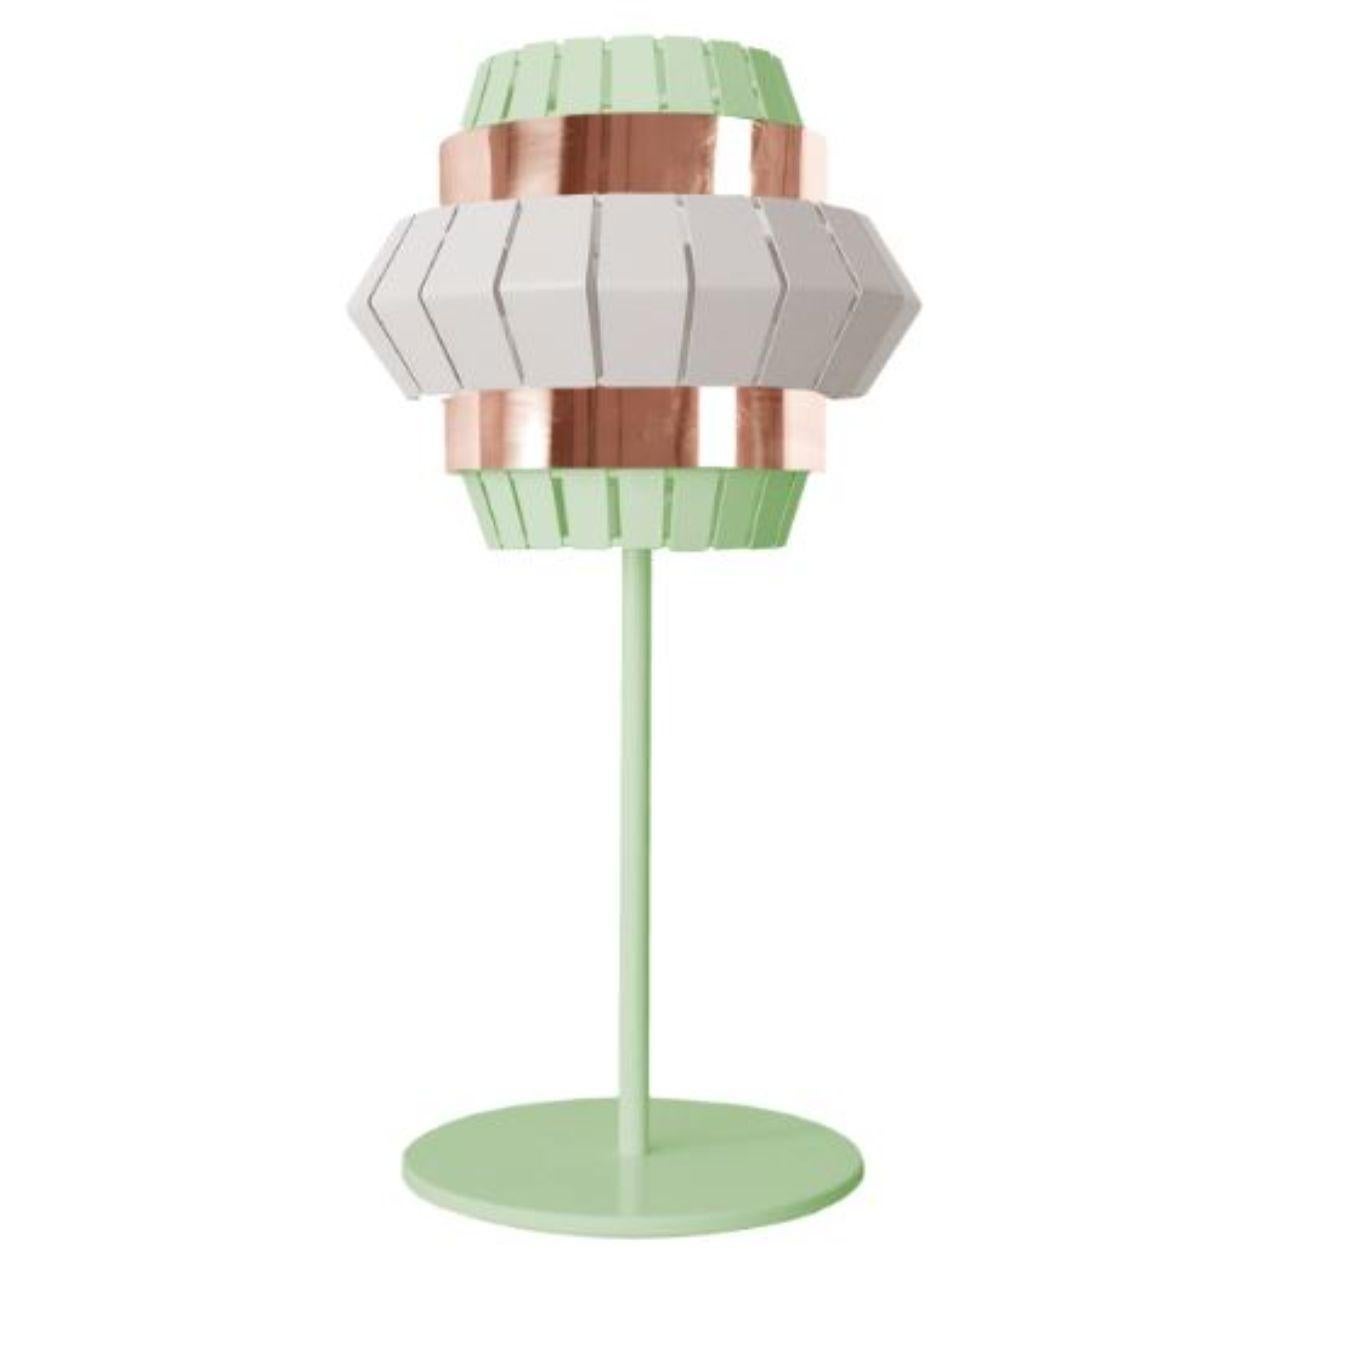 Ivory and dream comb table lamp with copper ring by Dooq
Dimensions: W 25.5 x D 25.5 x H 60 cm
Materials: lacquered metal, polished copper.
Also available in different colors and materials.

Information:
230V/50Hz
E14/1x20W